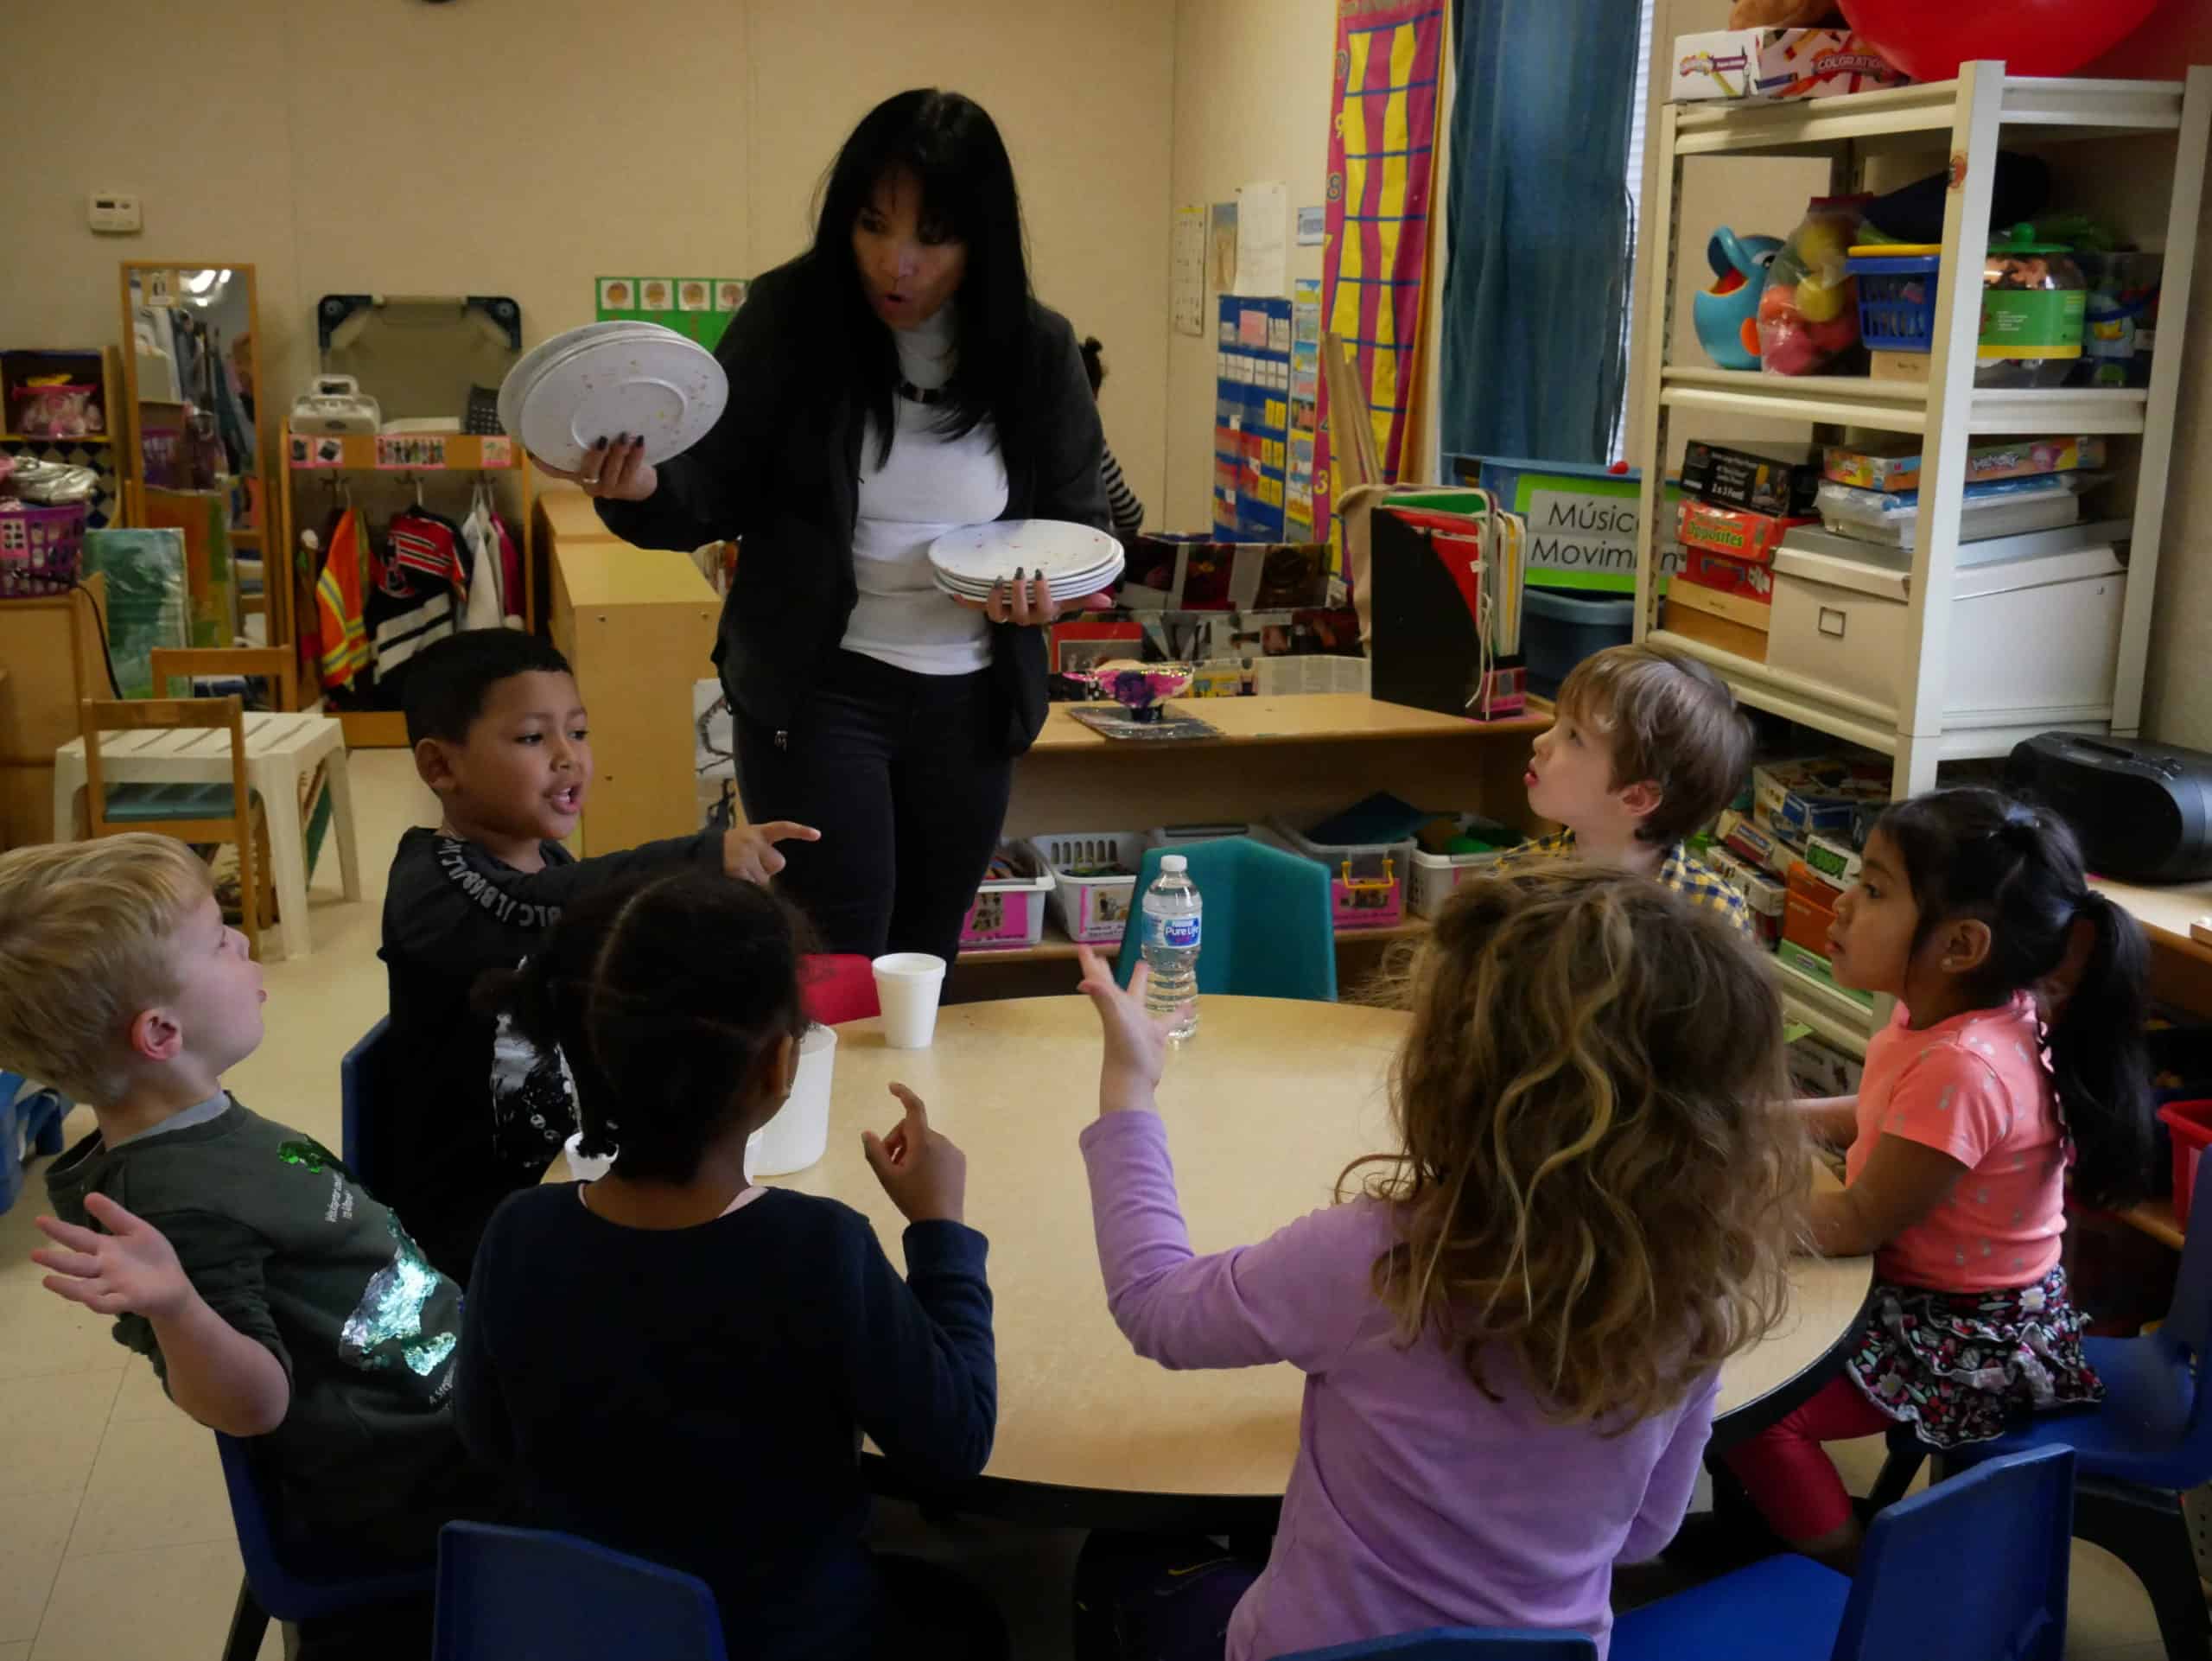 How North Carolina could boost learning in early childhood - EducationNC